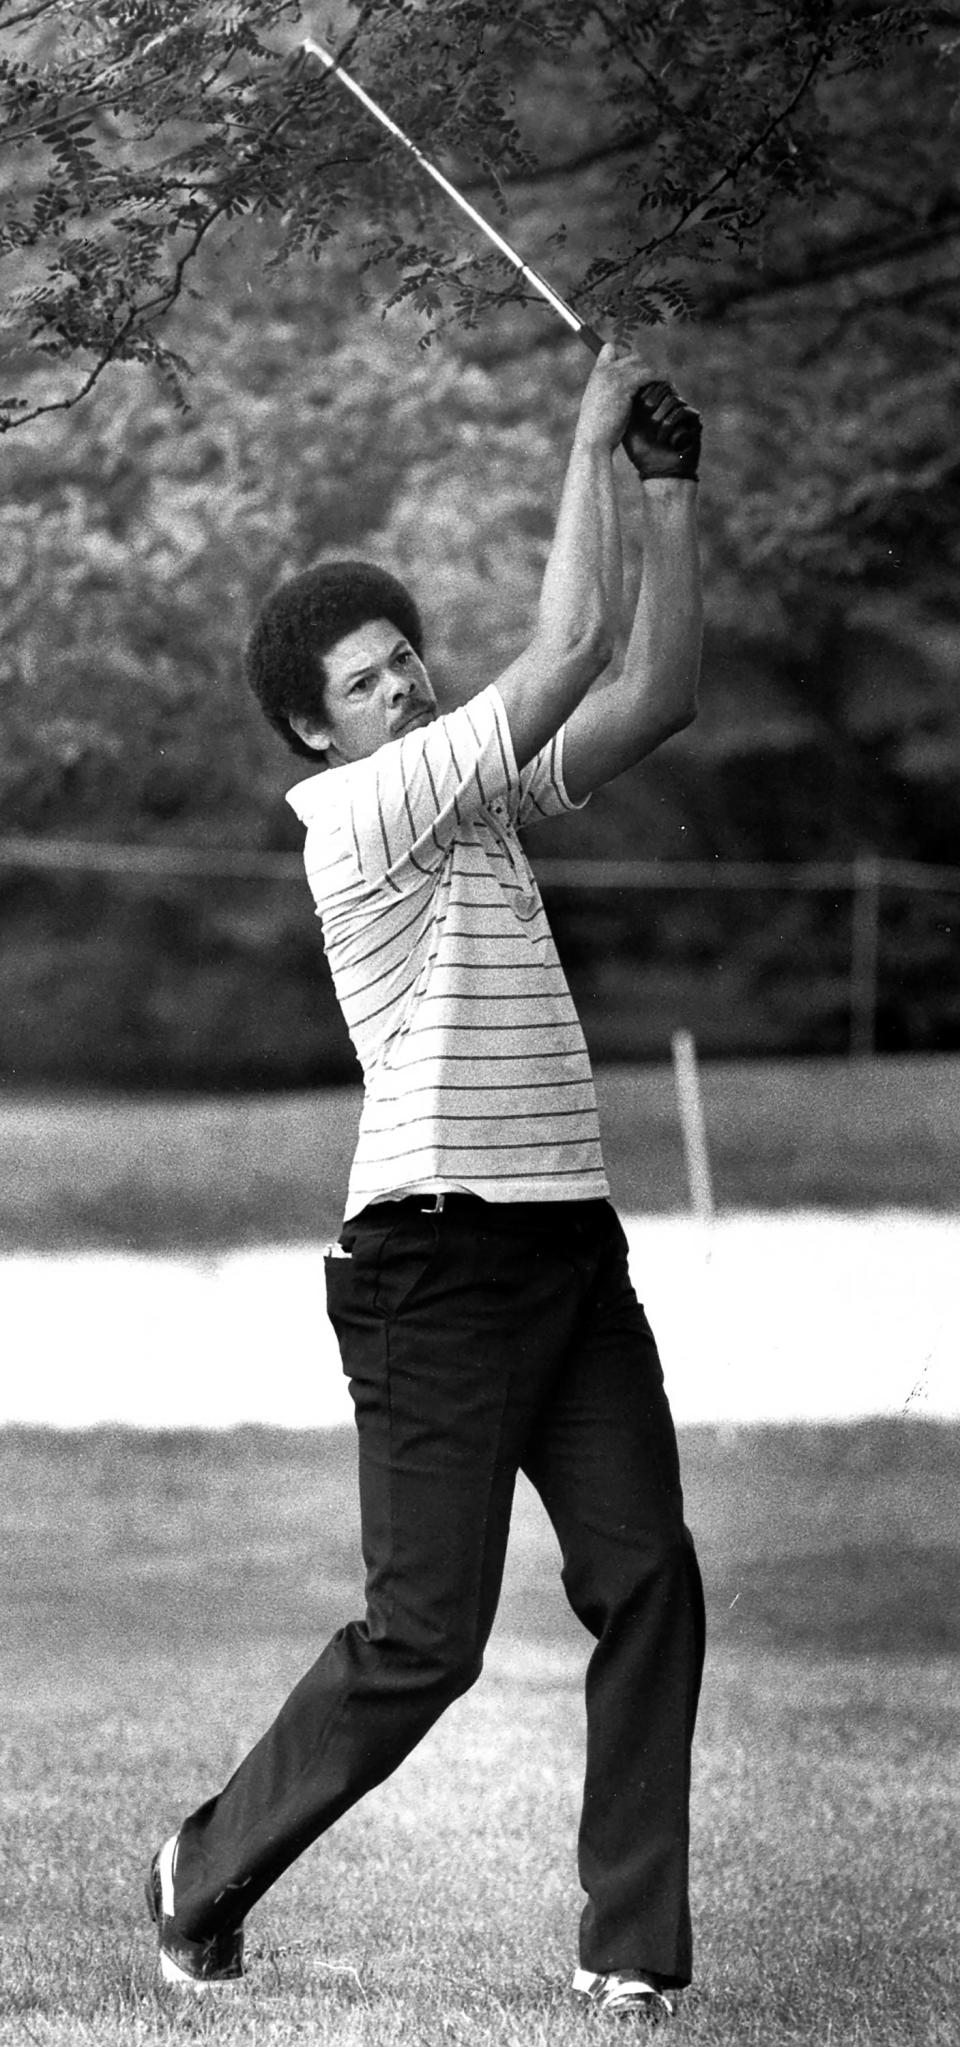 Cleveland Cavaliers legend Bingo Smith takes his approach shot from the tree line along the No. 13 fairway during the World Series of Golf Pro-Am on Aug. 23, 1982.